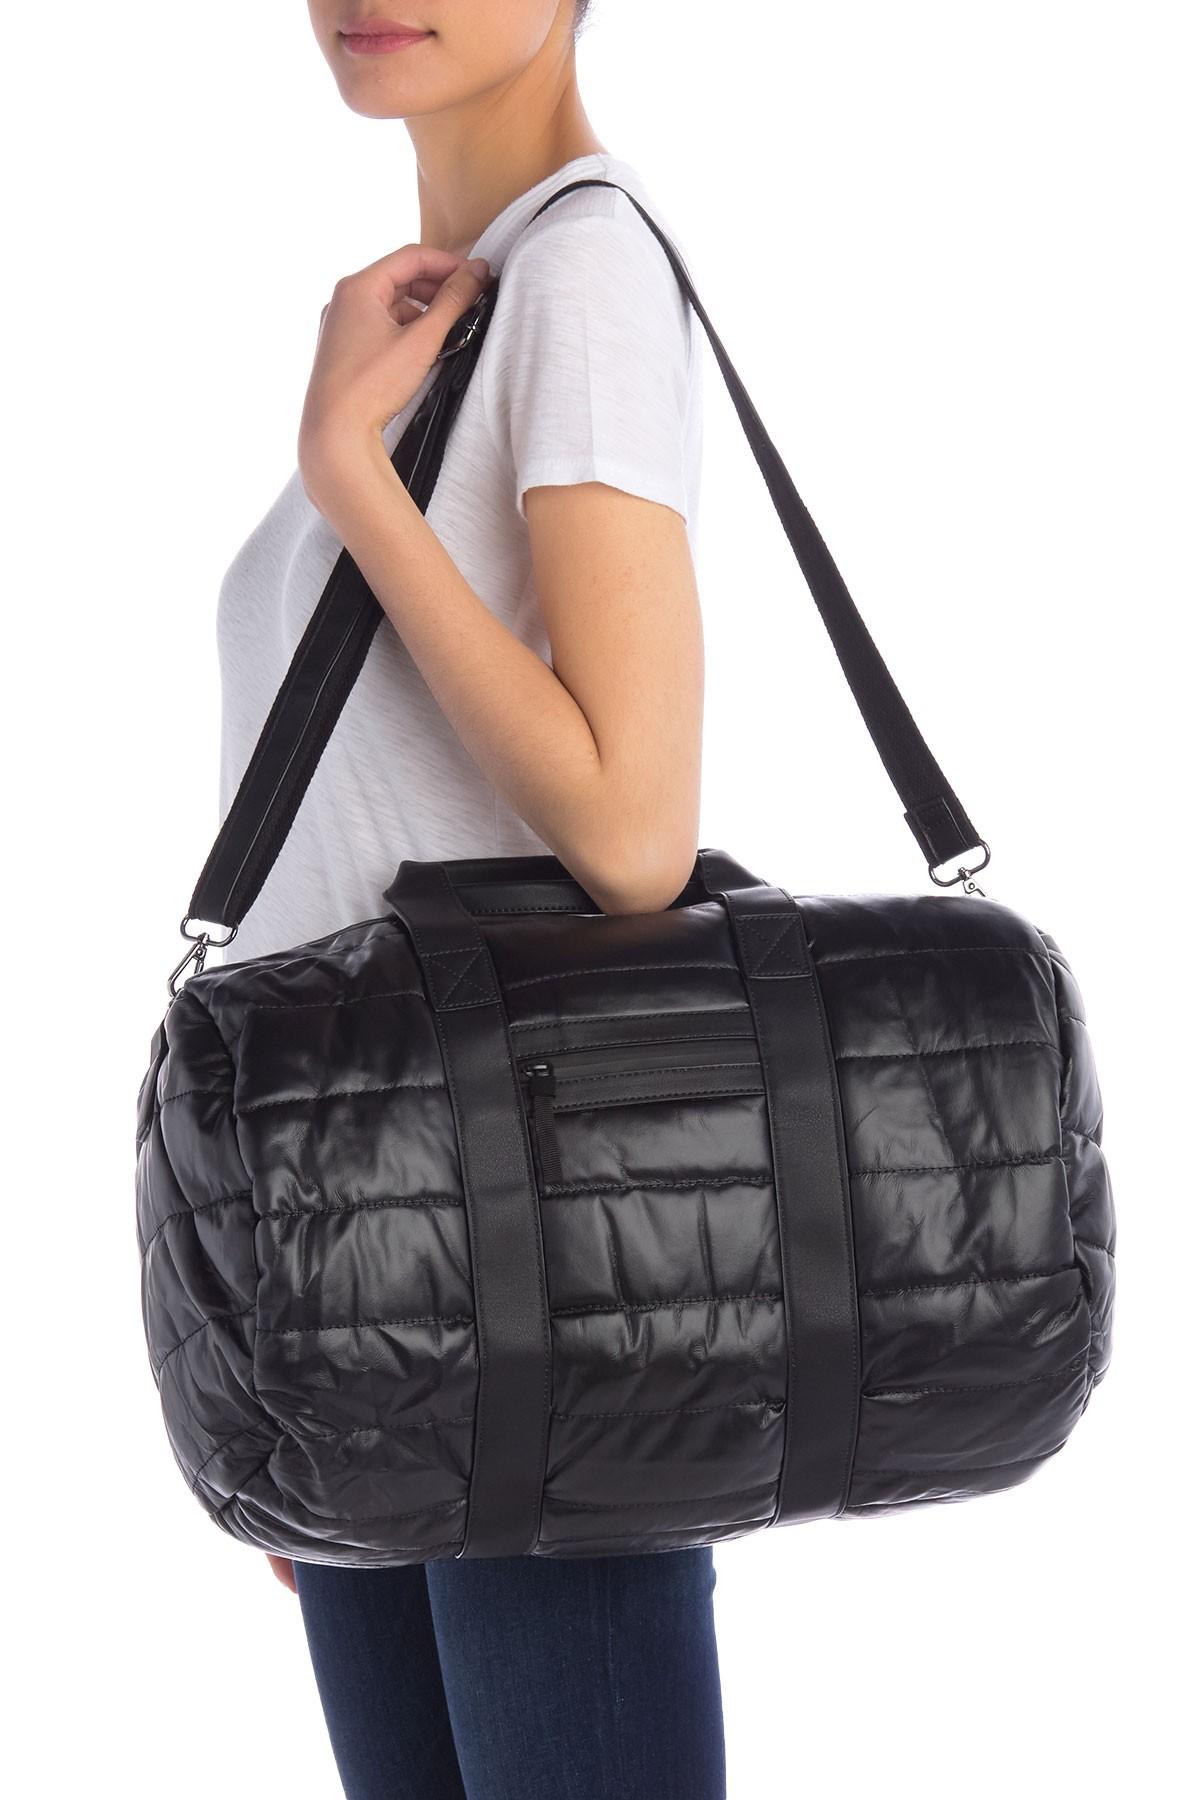 Urban Expressions Metallic Quilted Puffer Duffle Bag in Black | Lyst